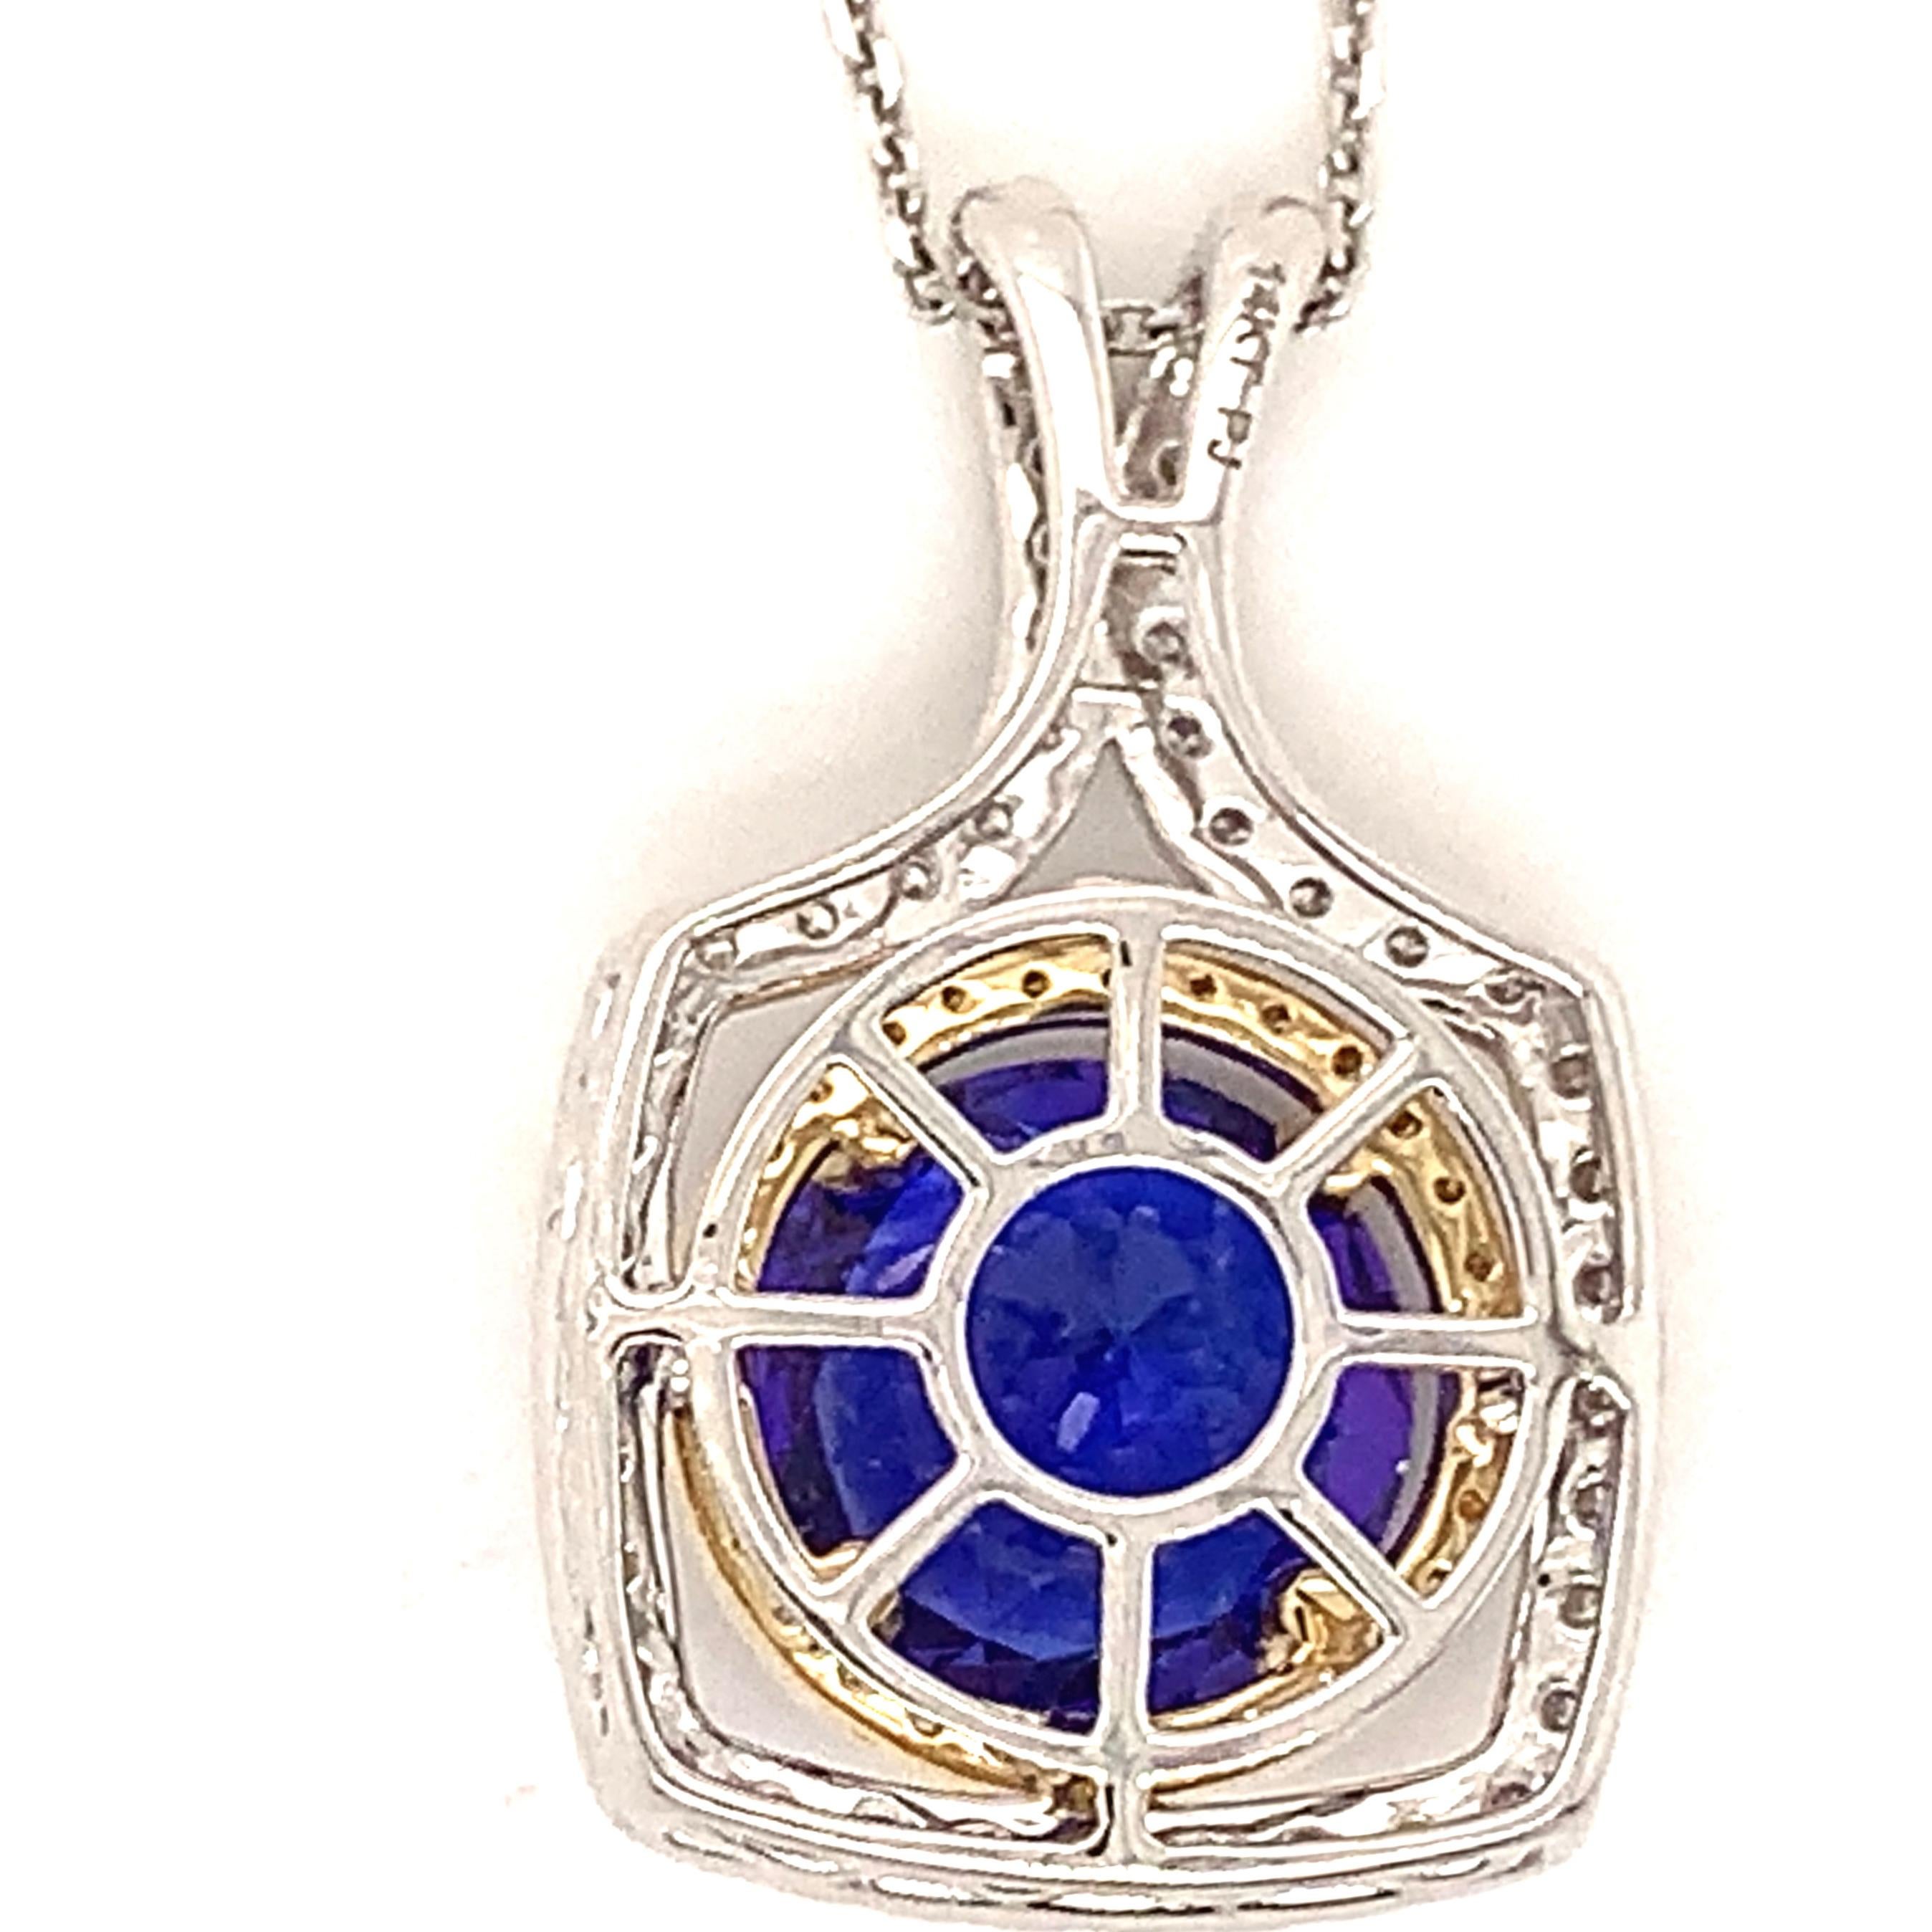 Round Tanzanite have been one of our treasured gems. This beautiful 502 carats loupe clean Tanzanite is surrounded with 75 VS grade, G colored diamonds weighing a total of 0.75 carats.
The pendant is two tone white and yellow 14 karat gold. The bale